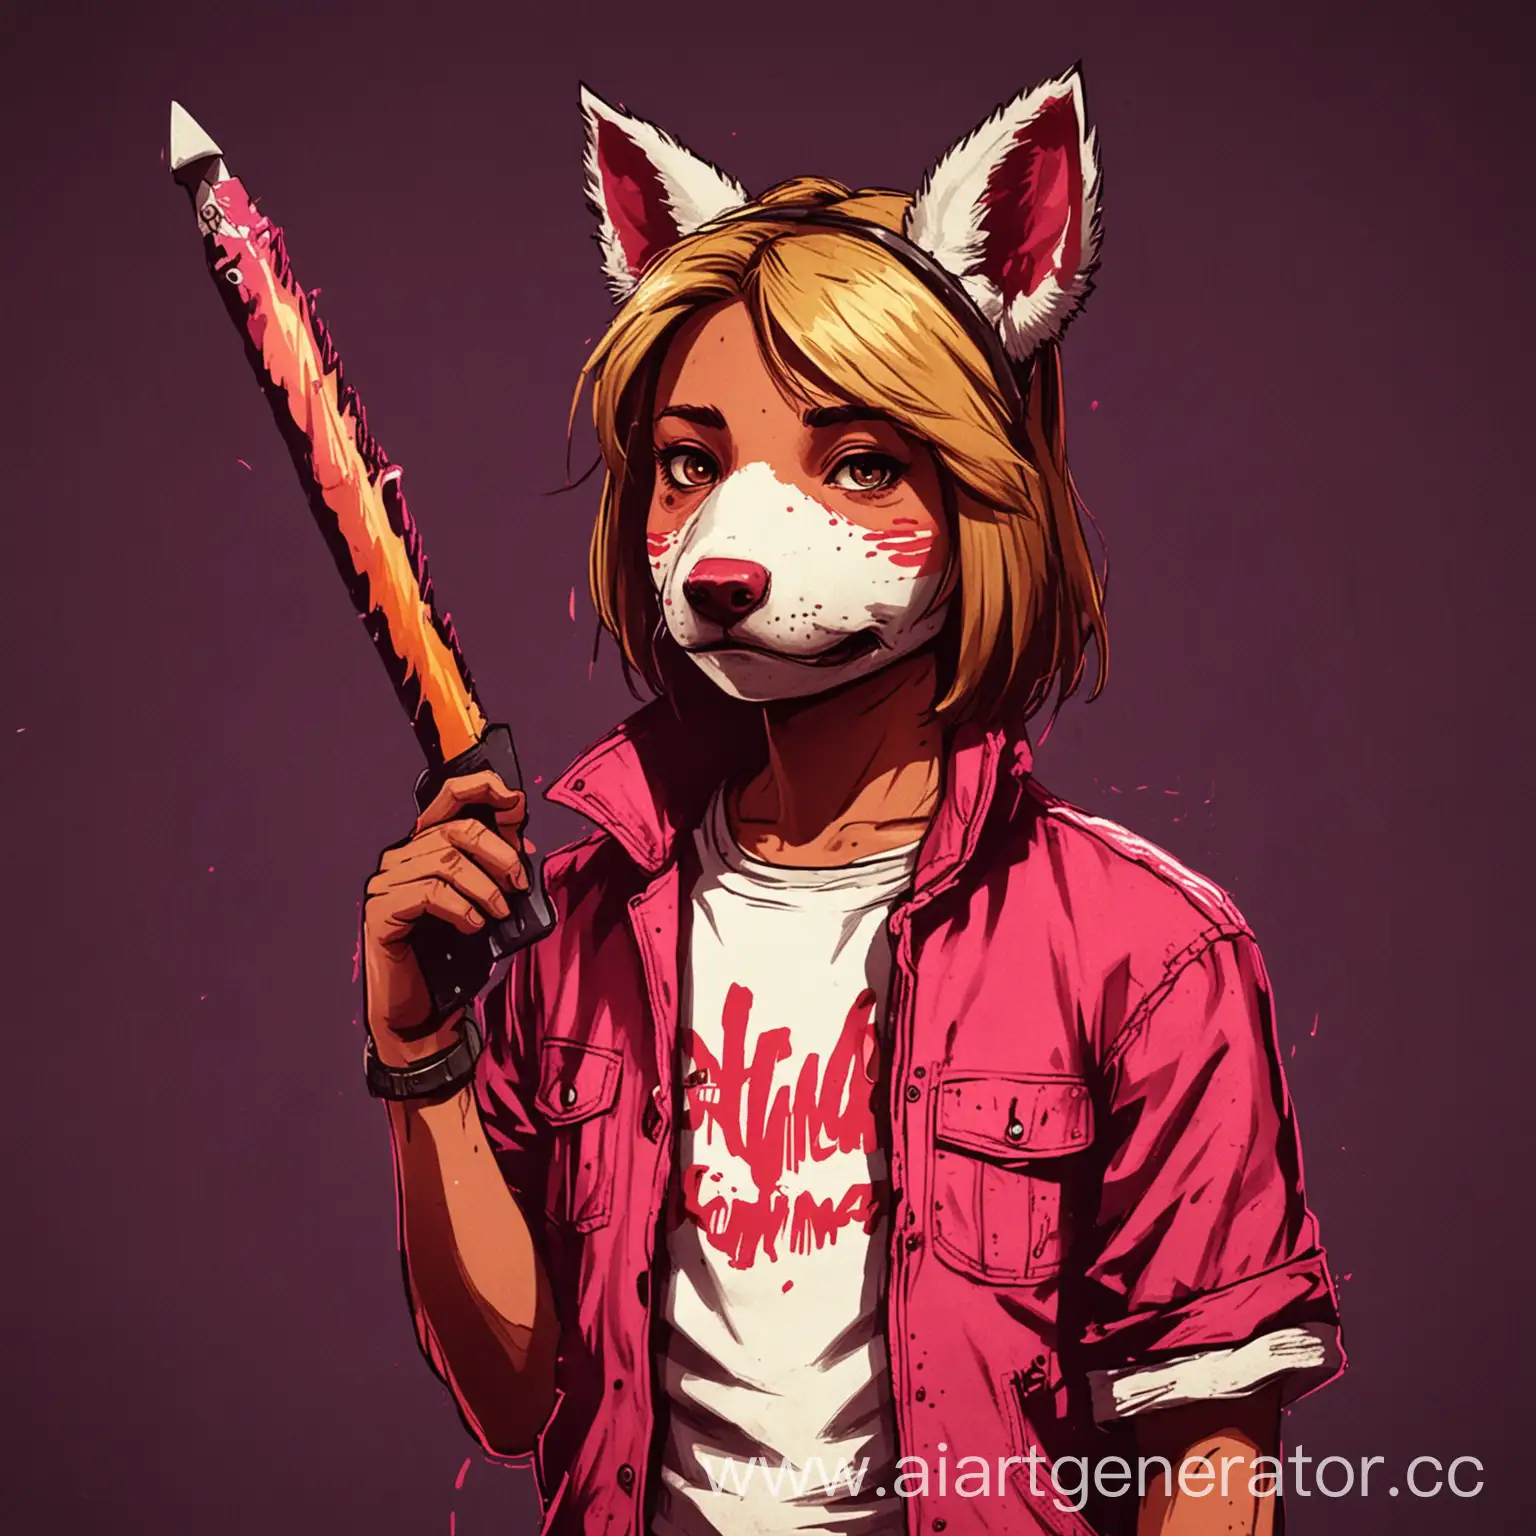 Violent-Confrontation-in-Neon-City-Inspired-by-HOTLINE-MIAMI